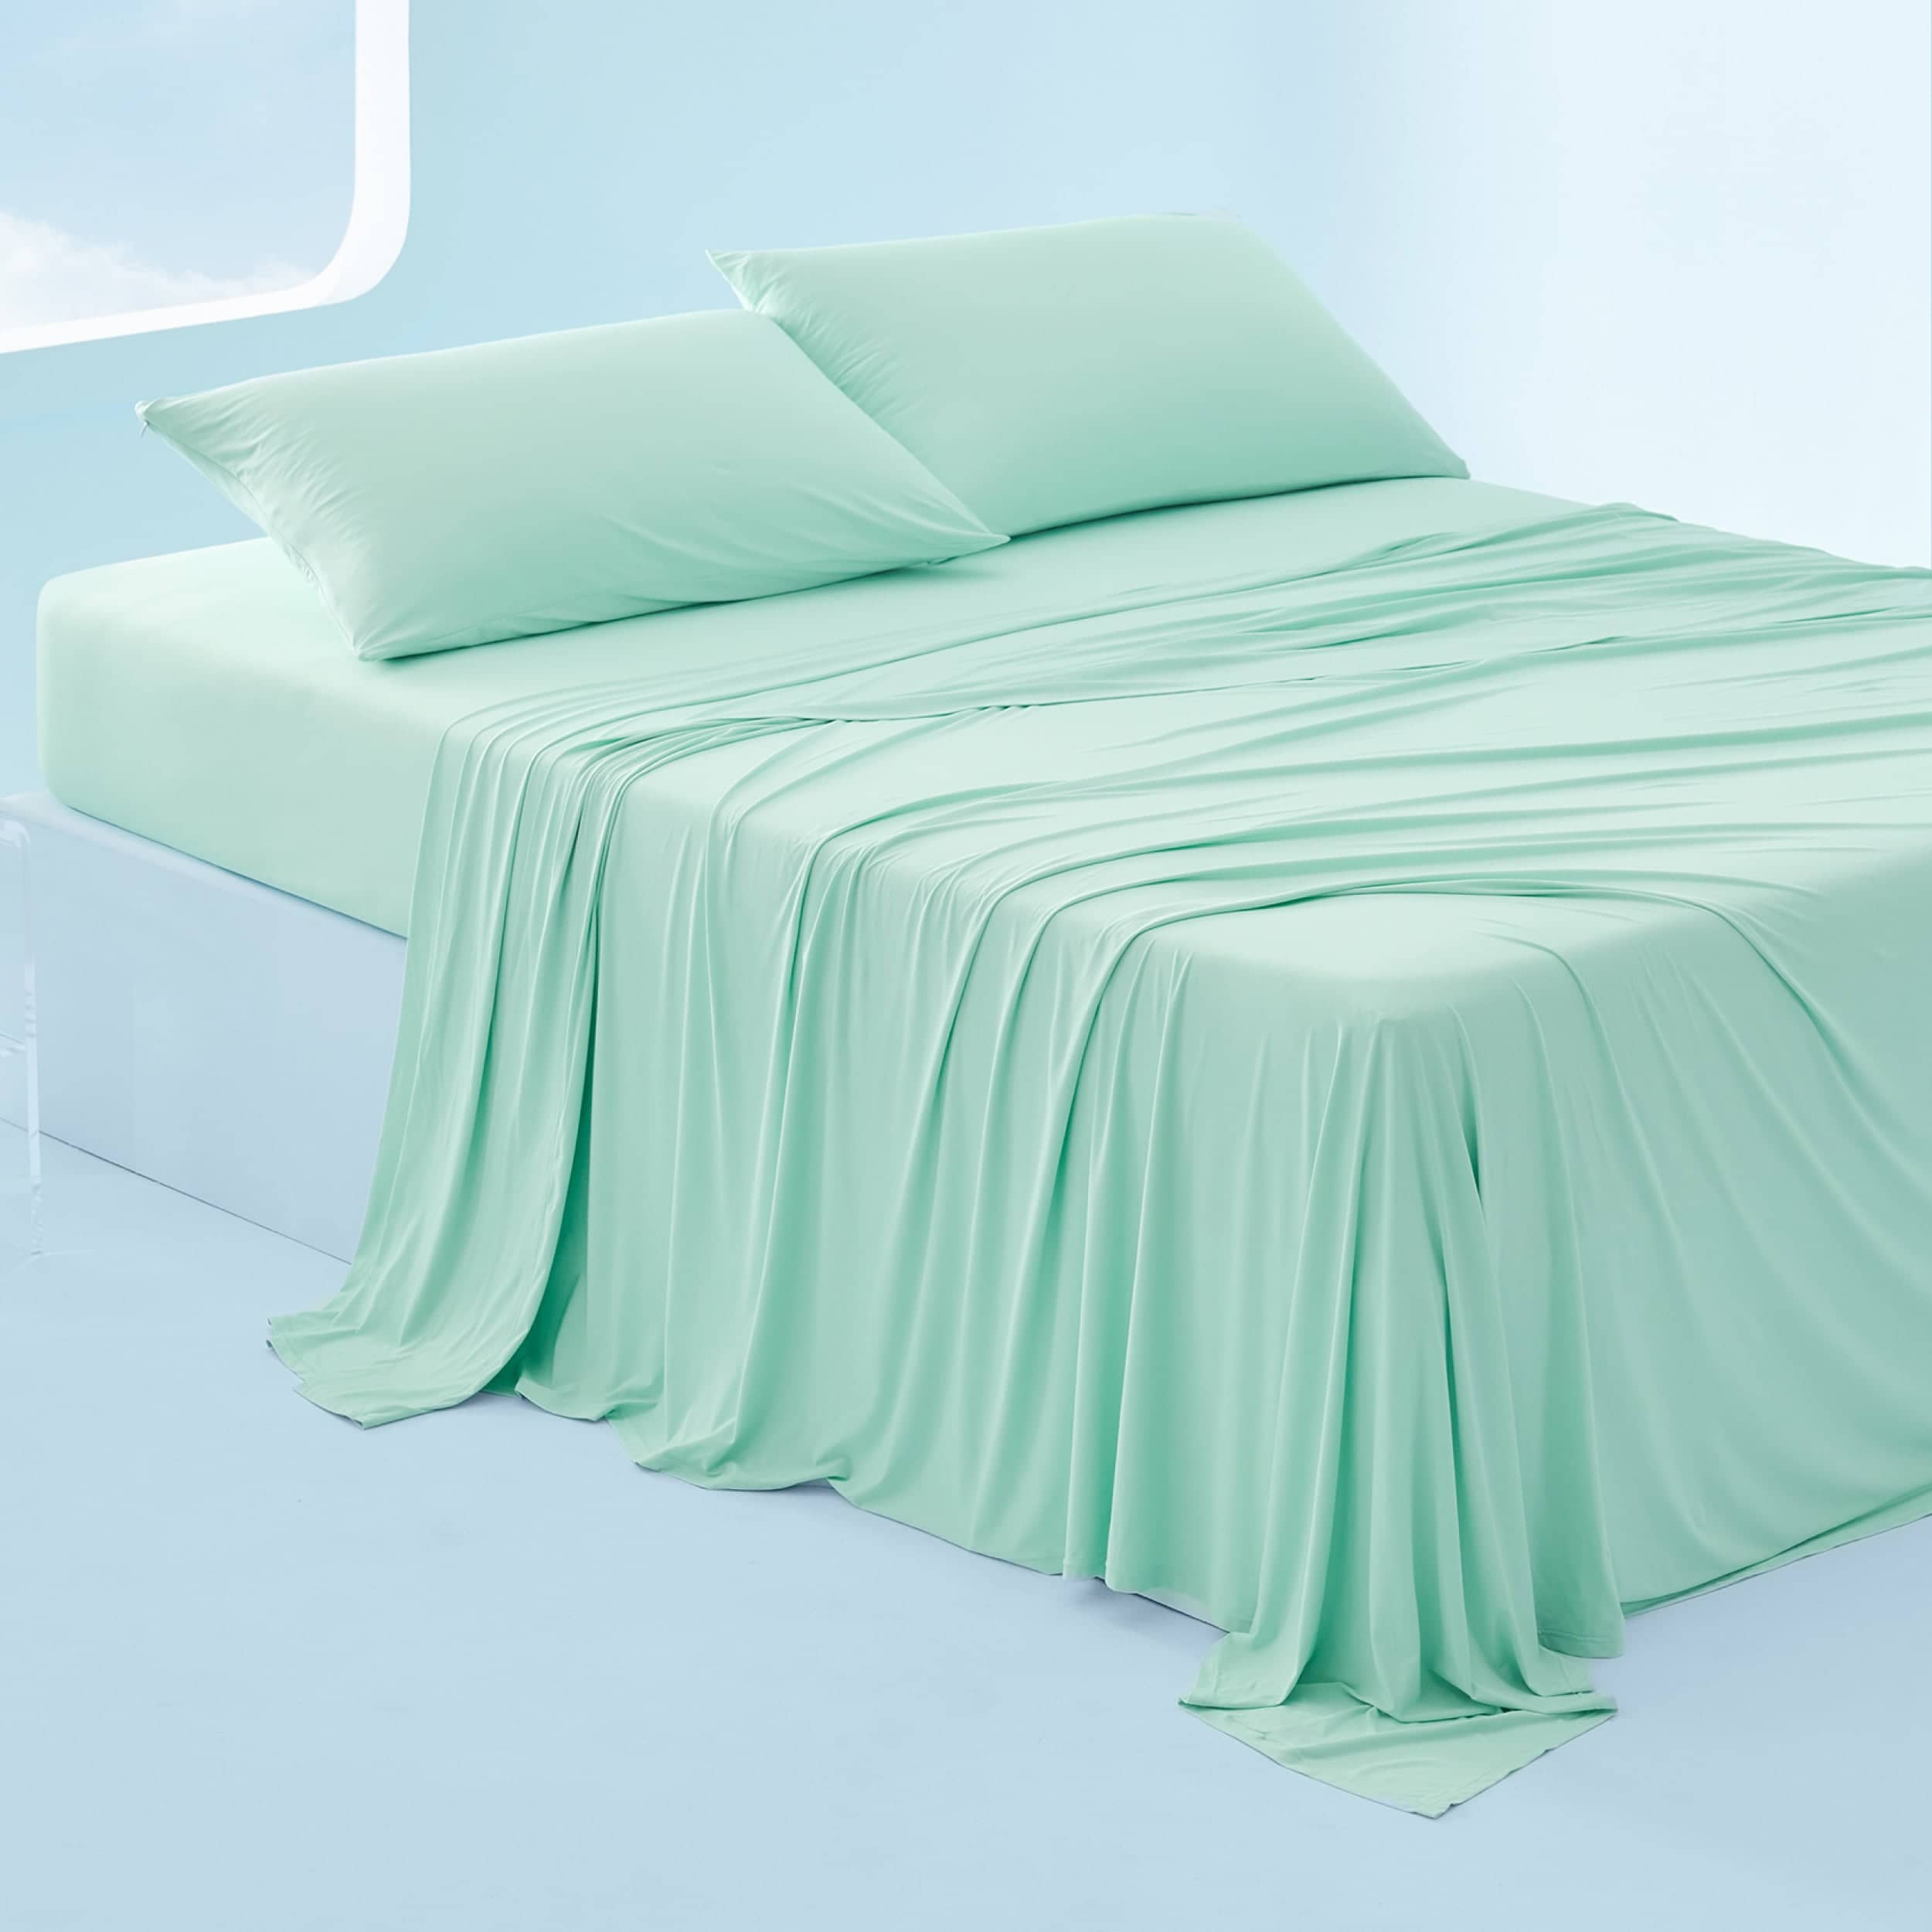 Bedsure Breescape Cooling Sheets, Cooling Sheets For Hot Sleeper, With a Deep Pocket Fits up to 17.5" Mattresses